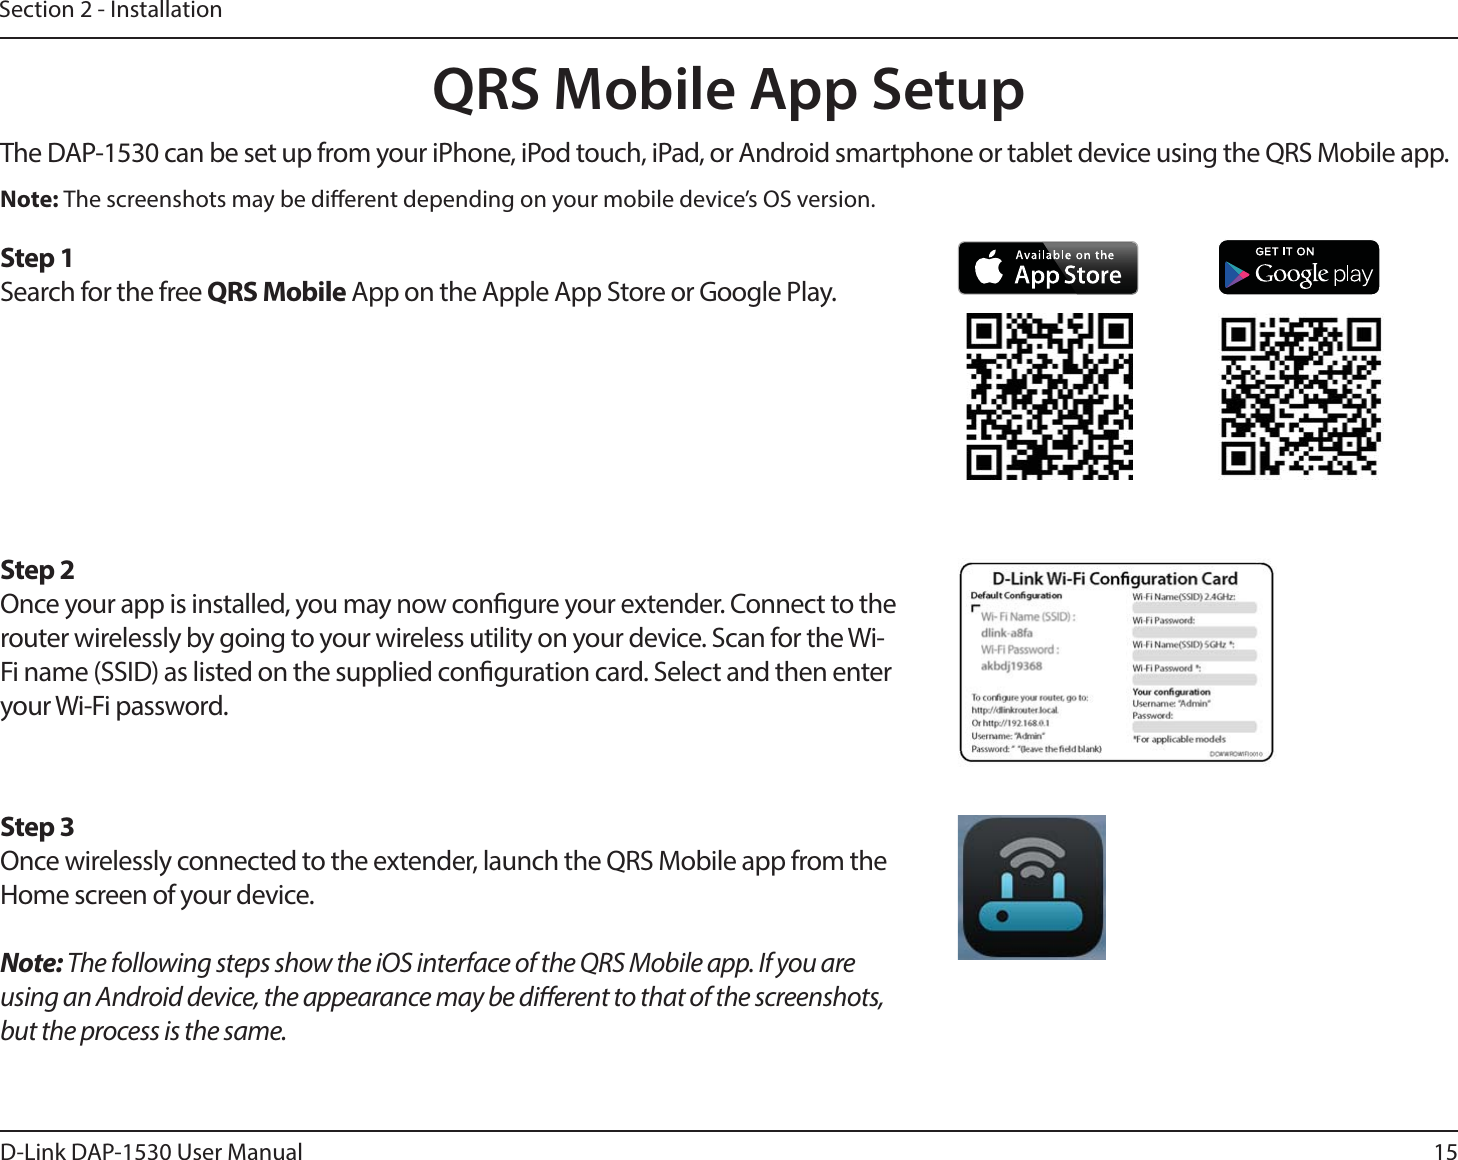 15D-Link DAP-1530 User ManualSection 2 - InstallationQRS Mobile App SetupThe DAP-1530 can be set up from your iPhone, iPod touch, iPad, or Android smartphone or tablet device using the QRS Mobile app.Step 2Once your app is installed, you may now congure your extender. Connect to the router wirelessly by going to your wireless utility on your device. Scan for the Wi-Fi name (SSID) as listed on the supplied conguration card. Select and then enter your Wi-Fi password.Step 3Once wirelessly connected to the extender, launch the QRS Mobile app from the Home screen of your device.Note: The following steps show the iOS interface of the QRS Mobile app. If you are using an Android device, the appearance may be dierent to that of the screenshots, but the process is the same.Step 1Search for the free QRS Mobile App on the Apple App Store or Google Play.Note: The screenshots may be dierent depending on your mobile device’s OS version.